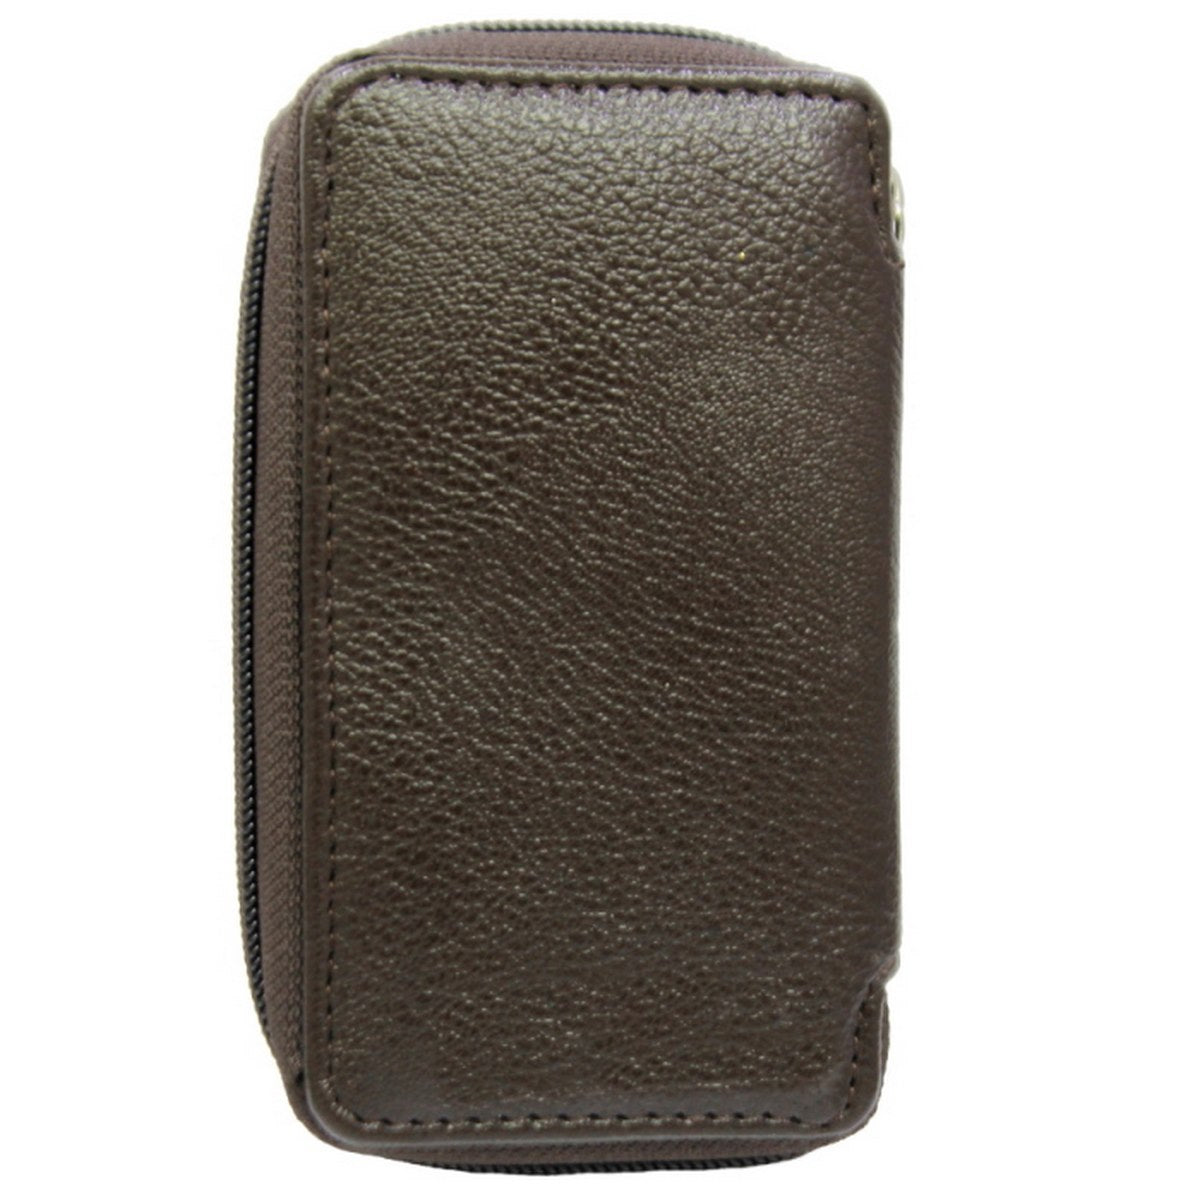 Brown 5 Inch Key Holder Guard Case - For Office Use, Personal Use, Corporate Gifting, Return Gift JAKGBR003